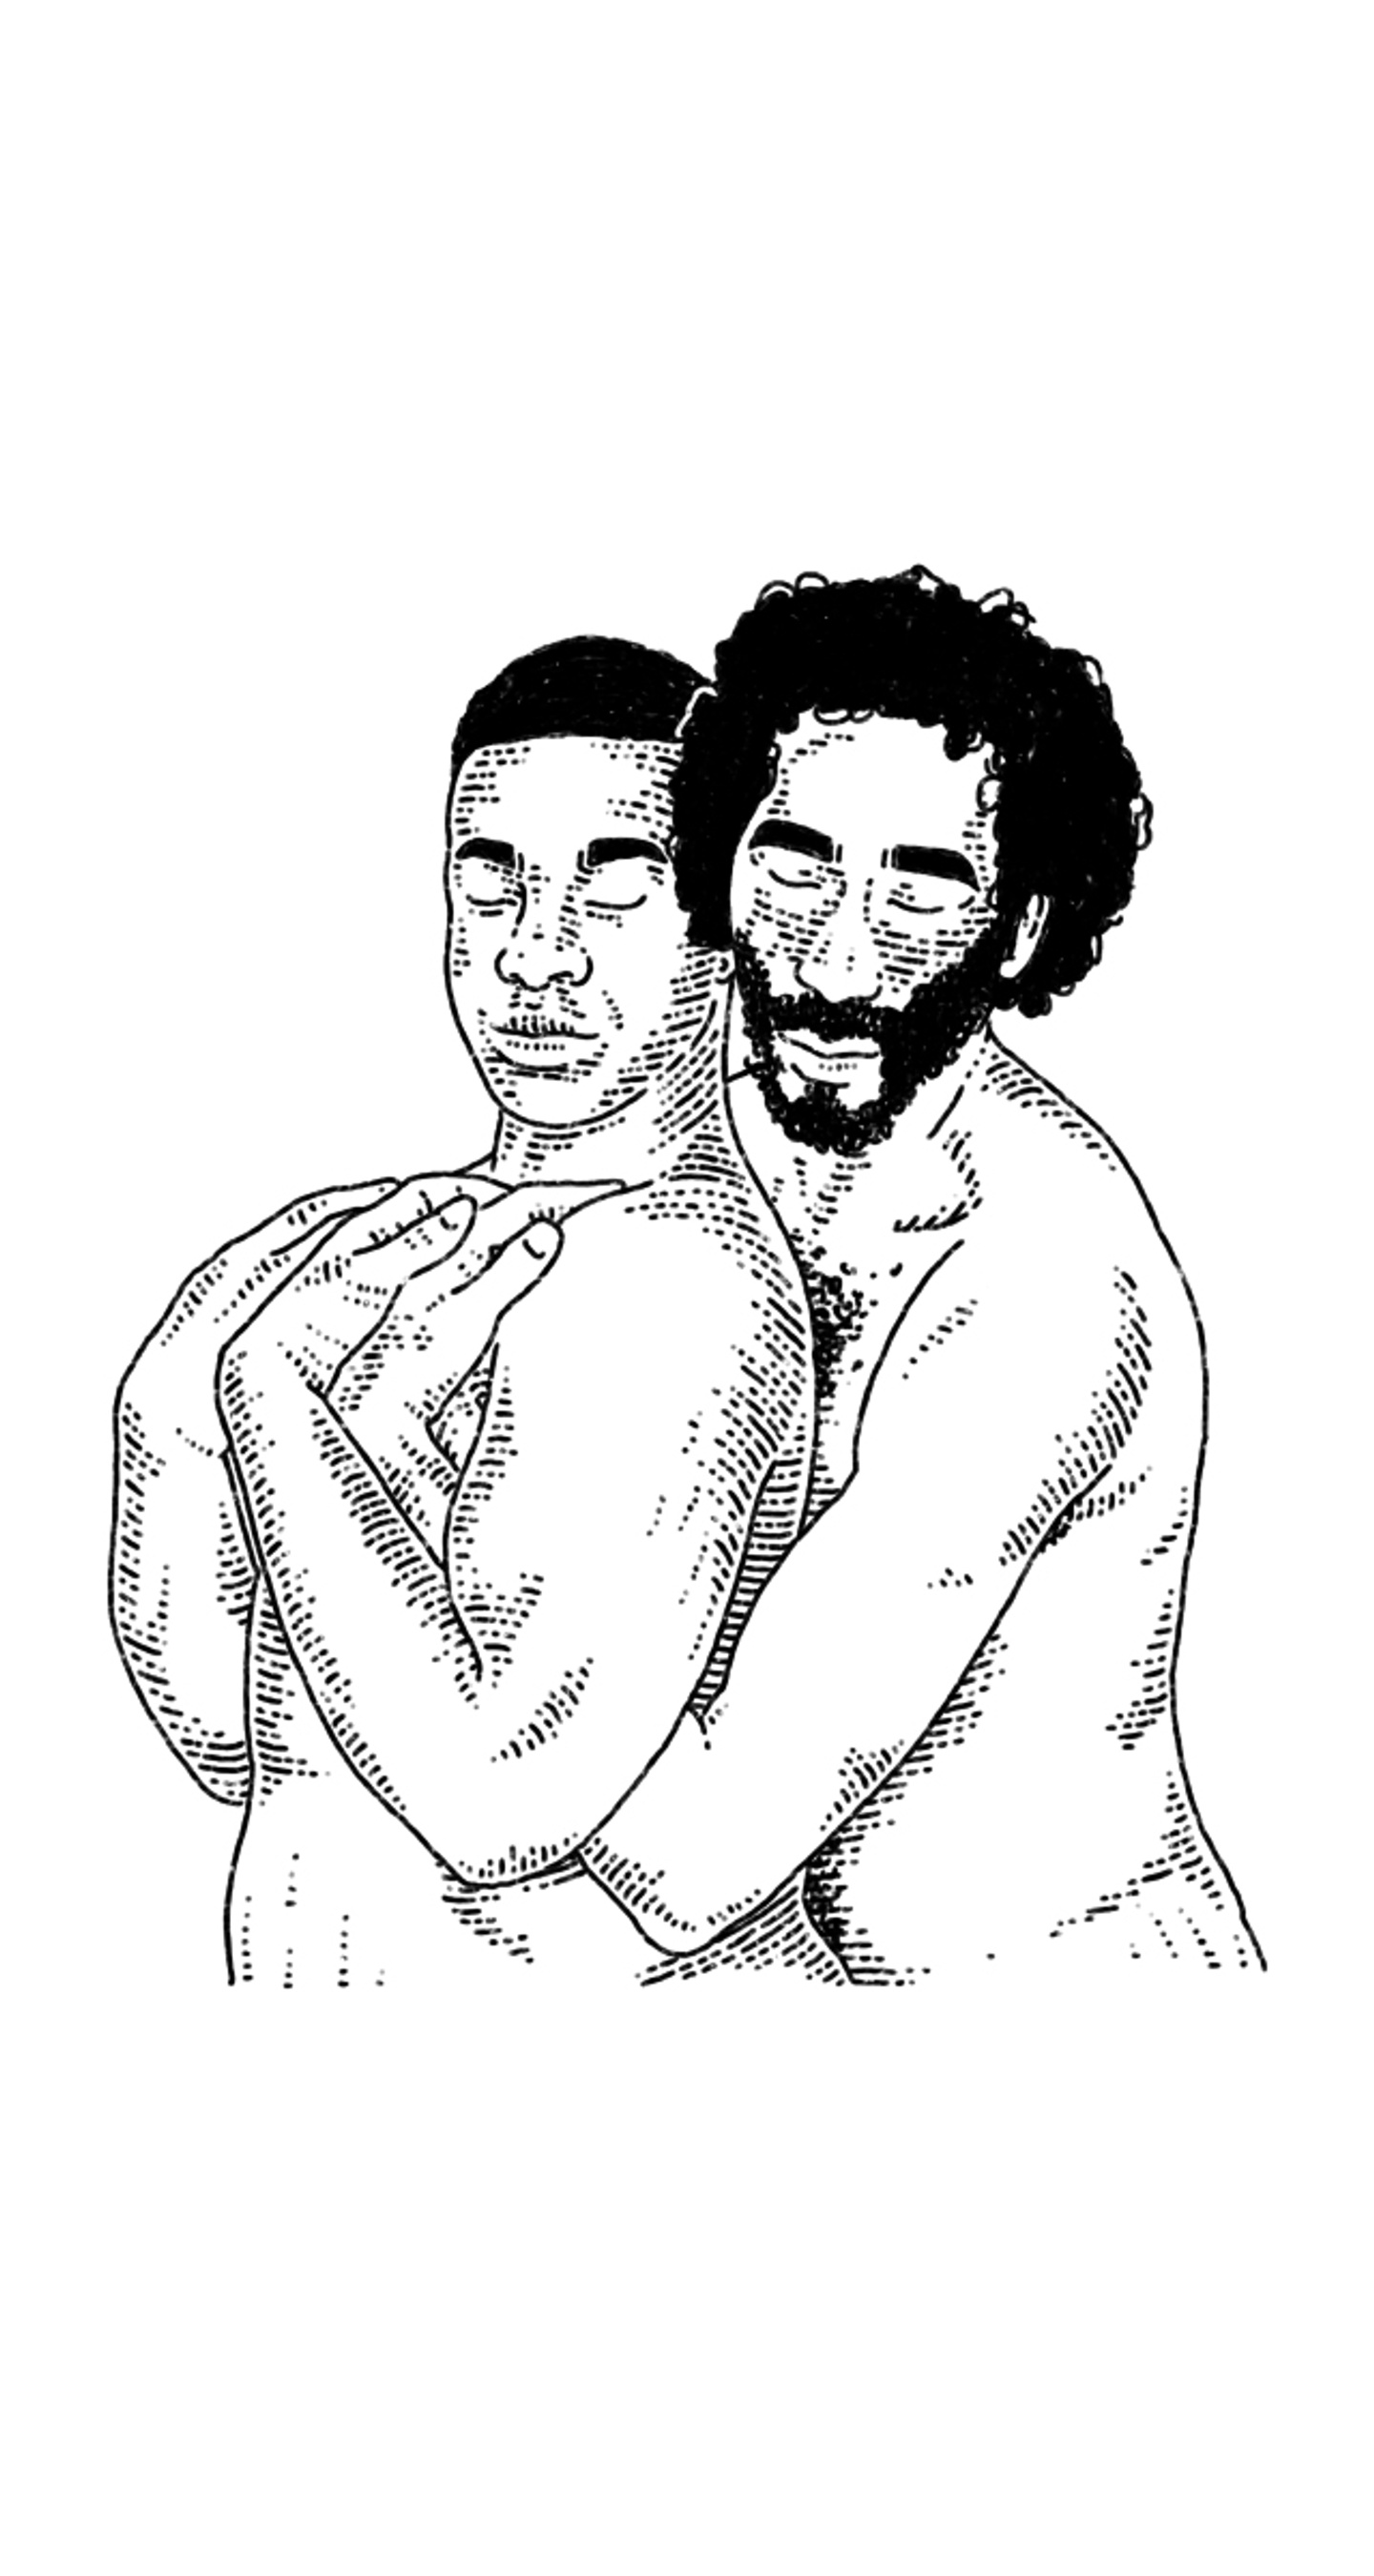 two ftm trans masculine people embracing each other intimately